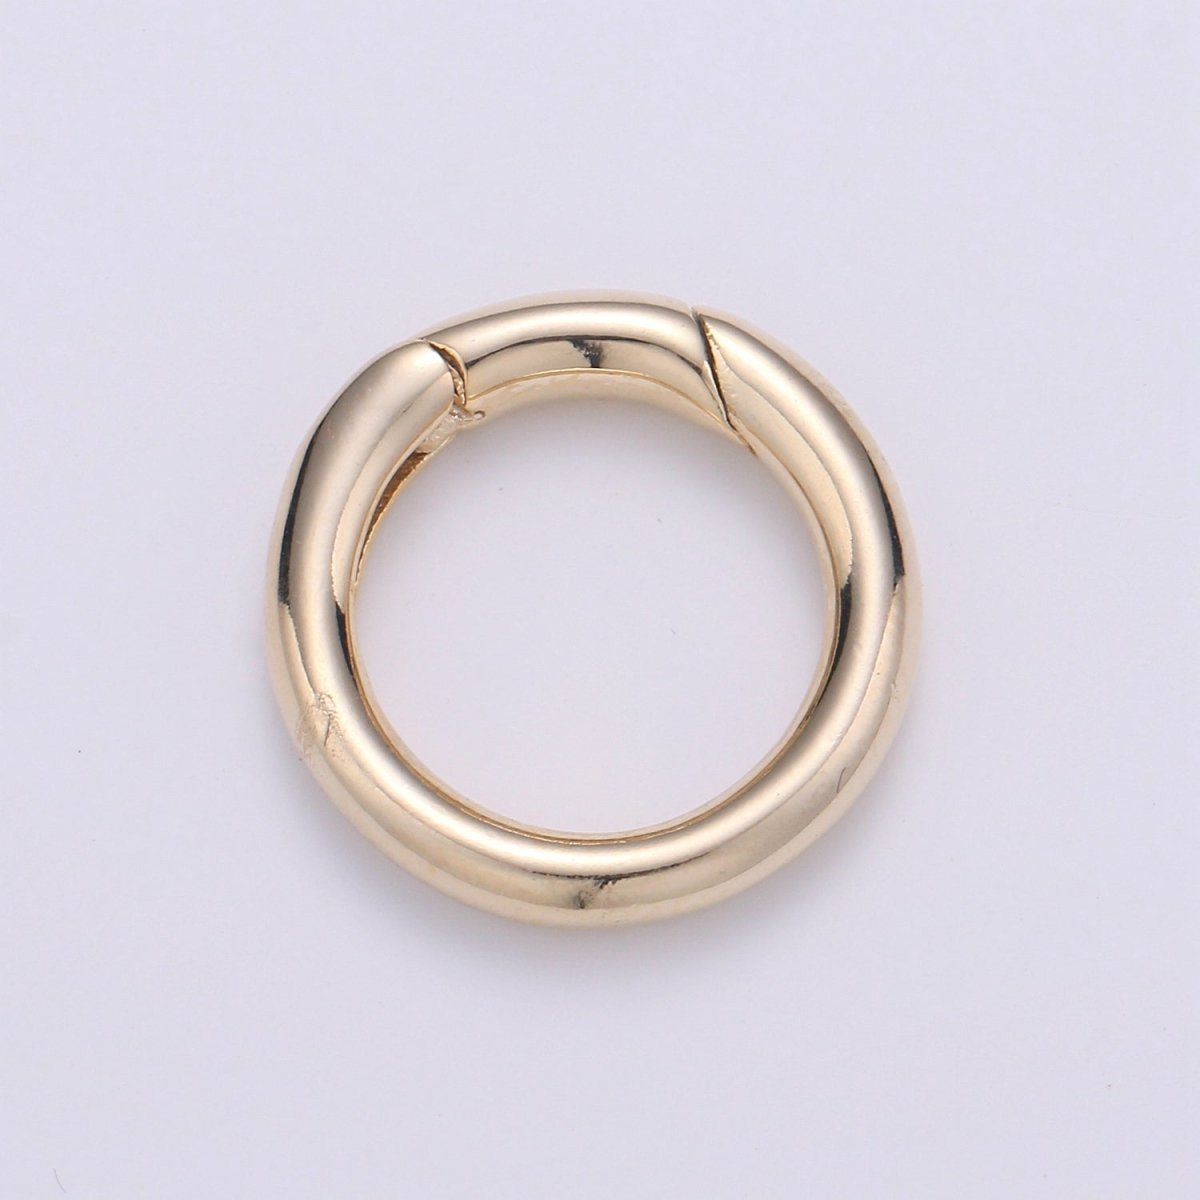 Ring End Clasp Gold Filled Clasp For Bracelet Necklace Jewelry Making L-005 - DLUXCA